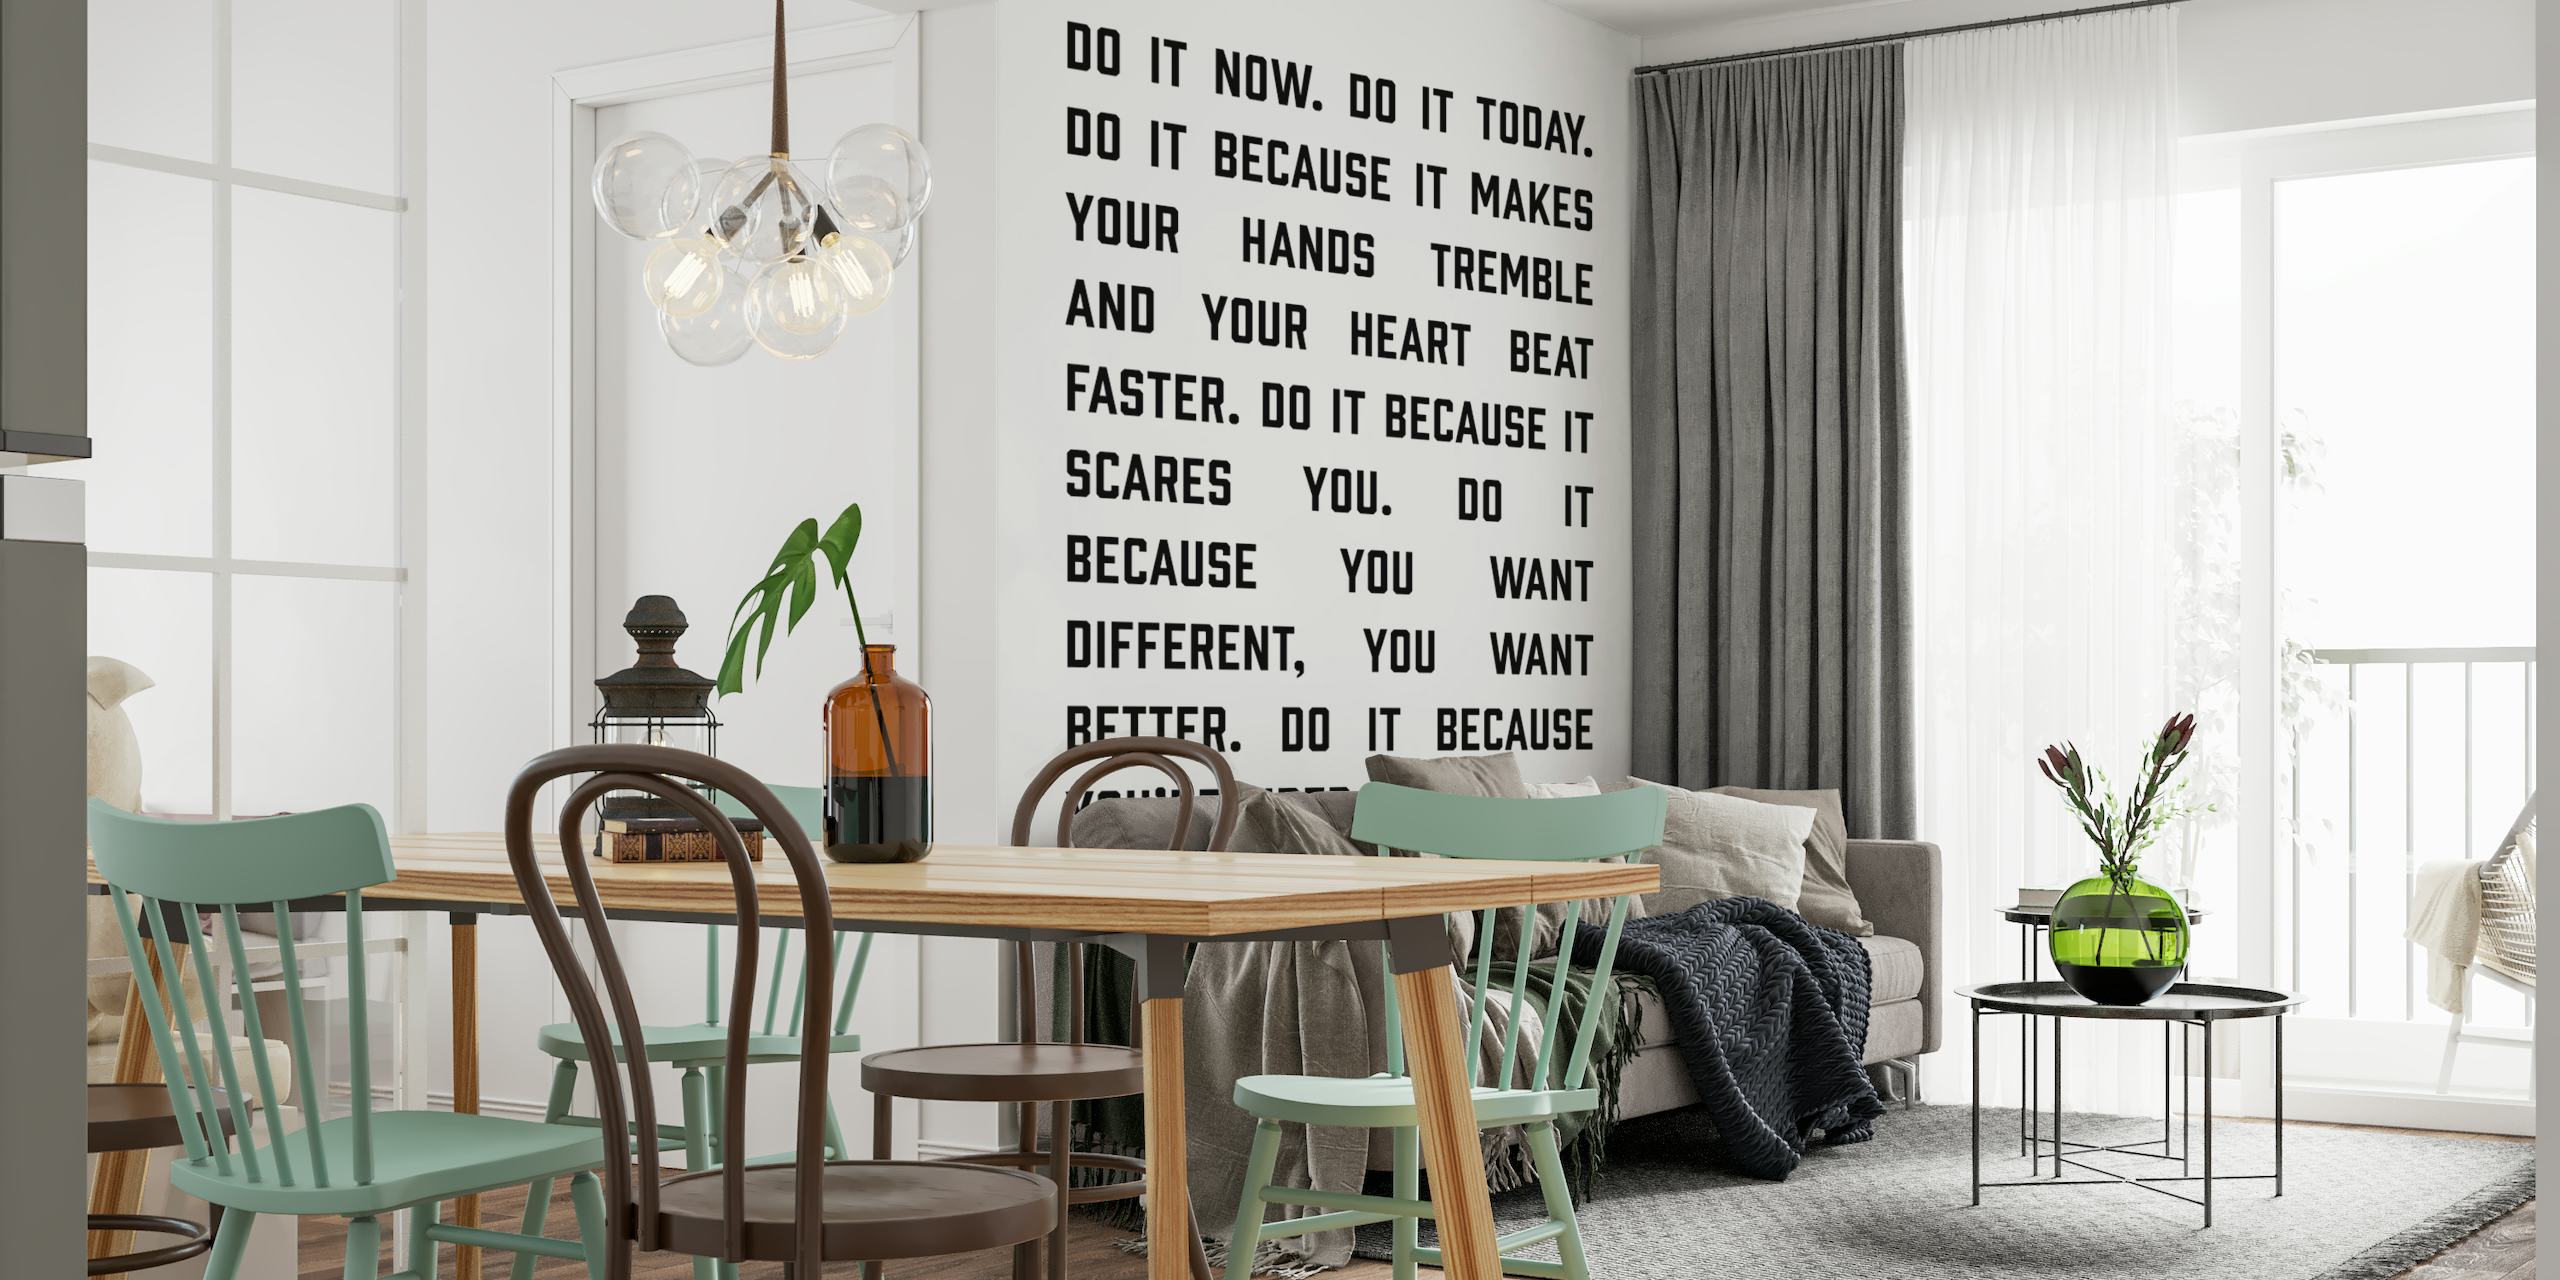 Motivational 'Do It Now' text wall mural in black and white